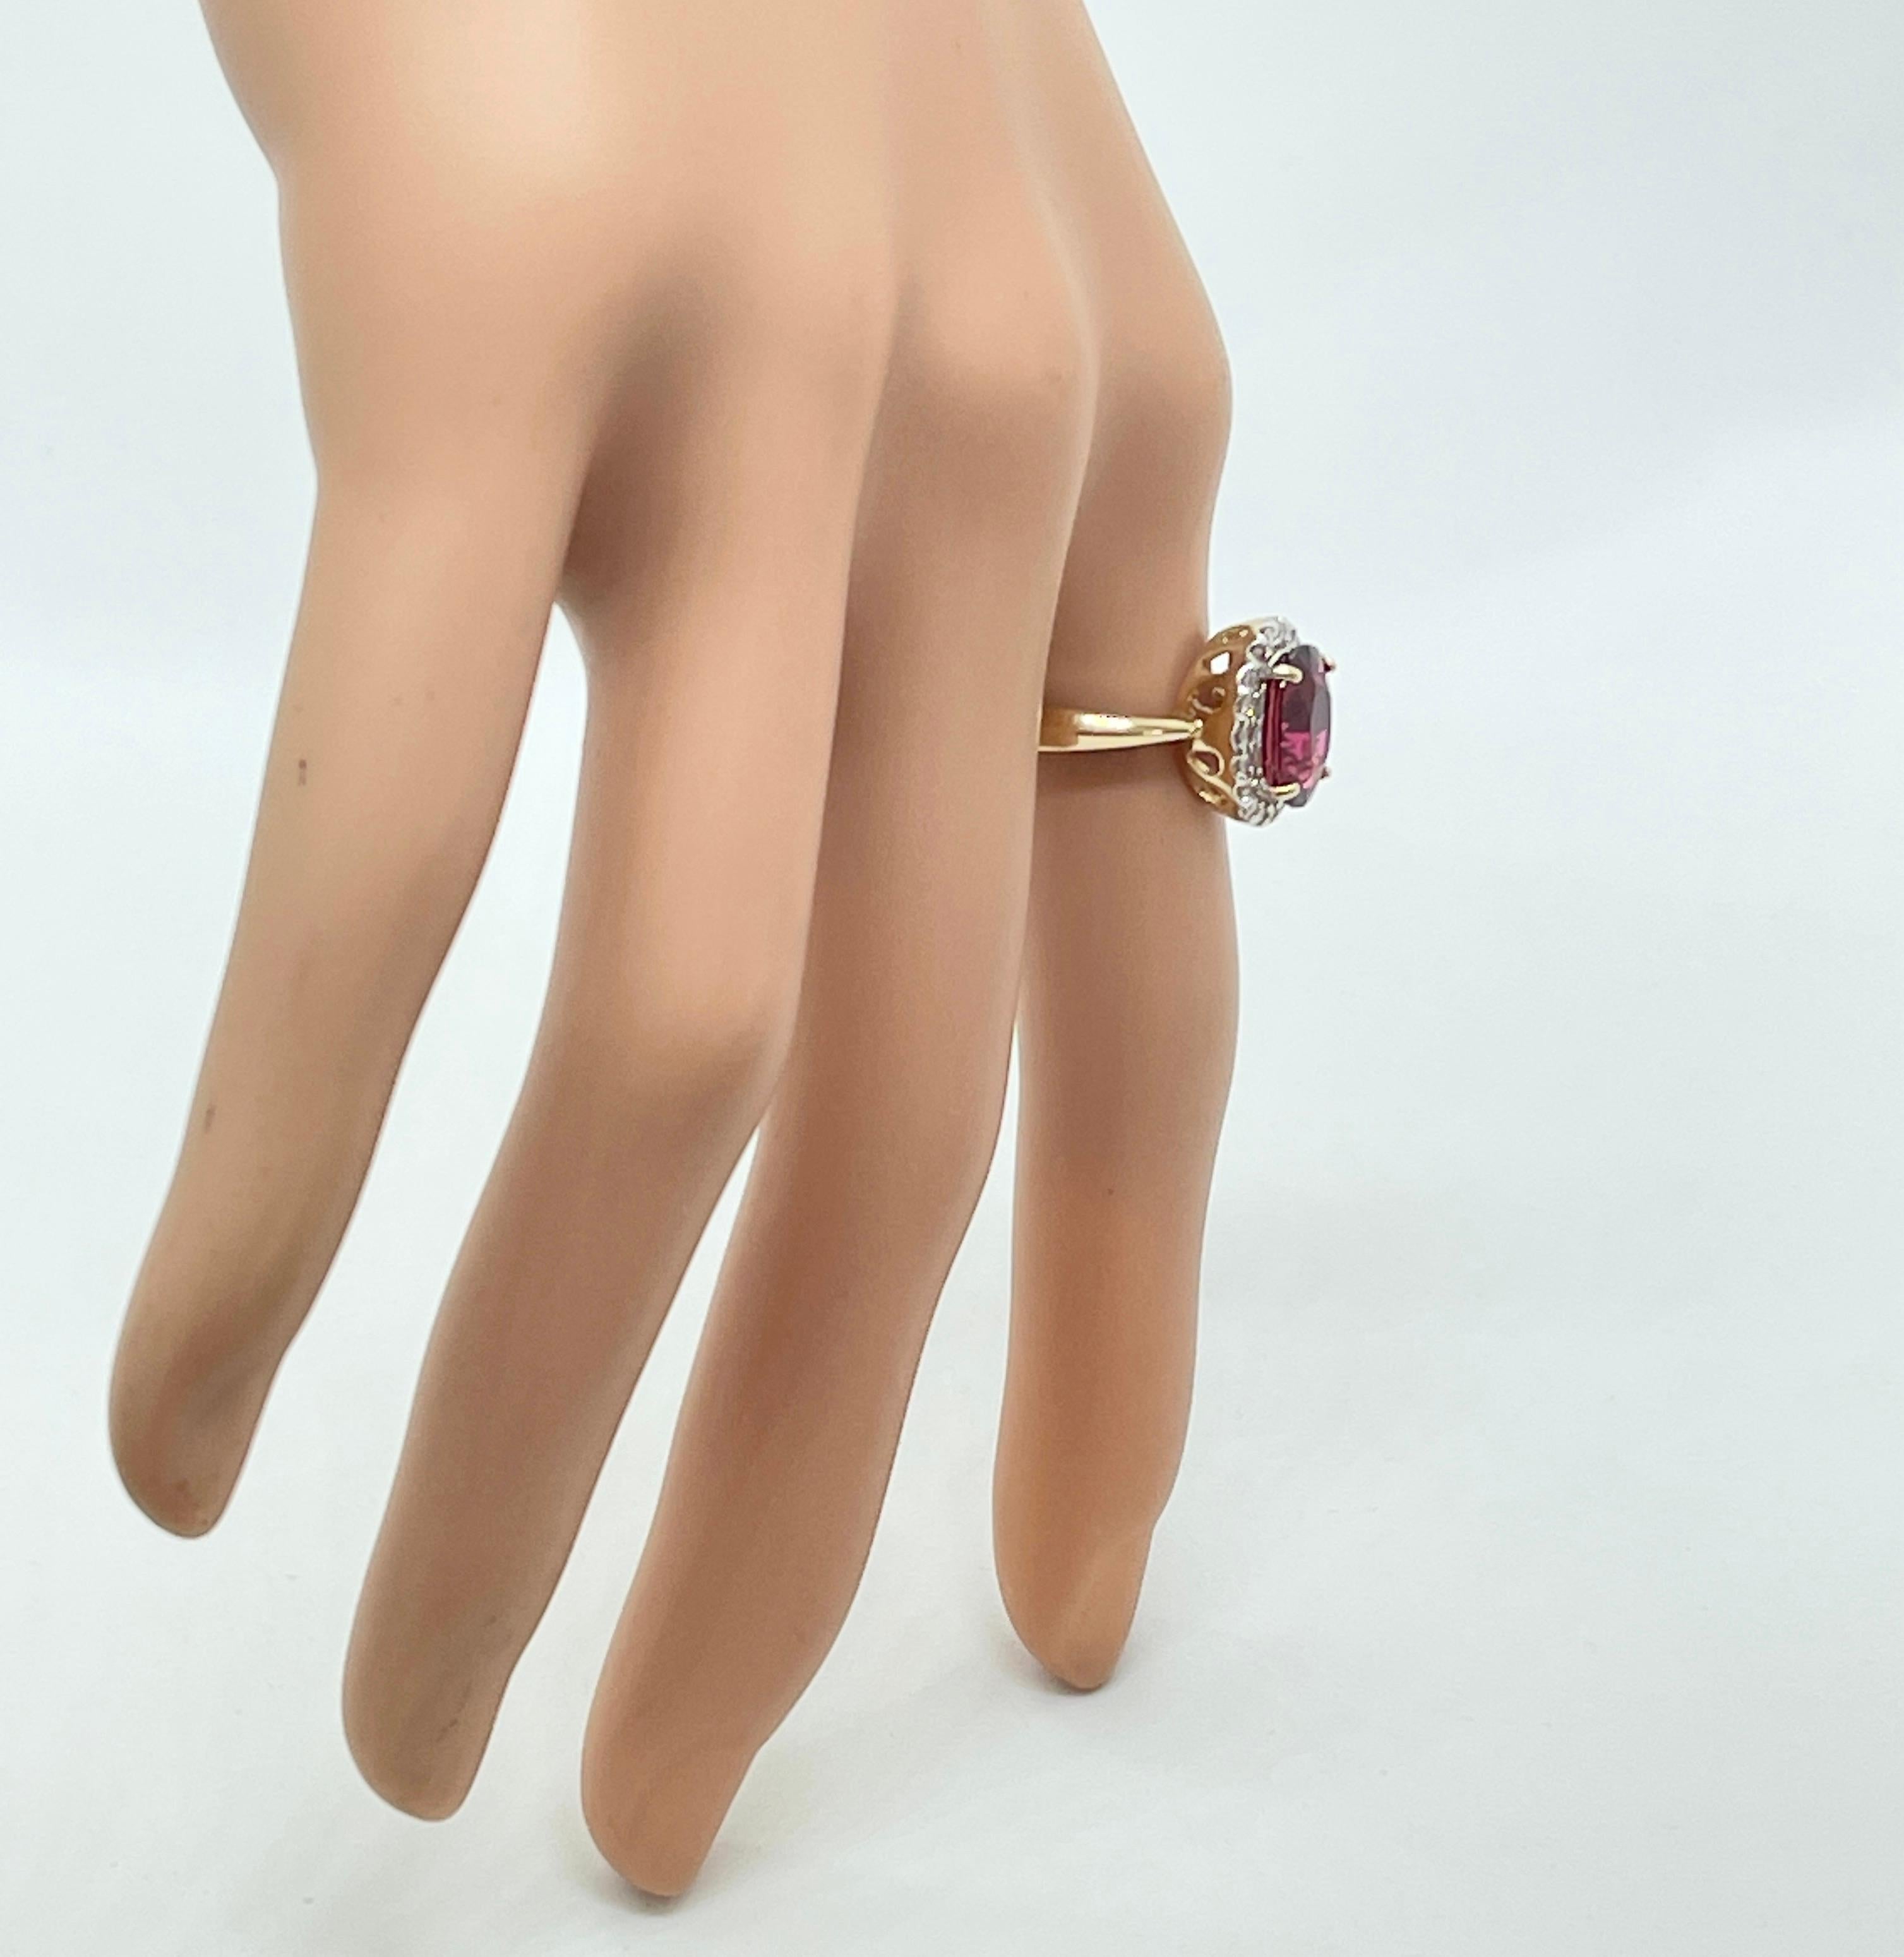 Genuine Natural Rubellite Tourmaline Diamond Halo Ring 9ct Yellow Gold Valuation In New Condition For Sale In Mona Vale, NSW